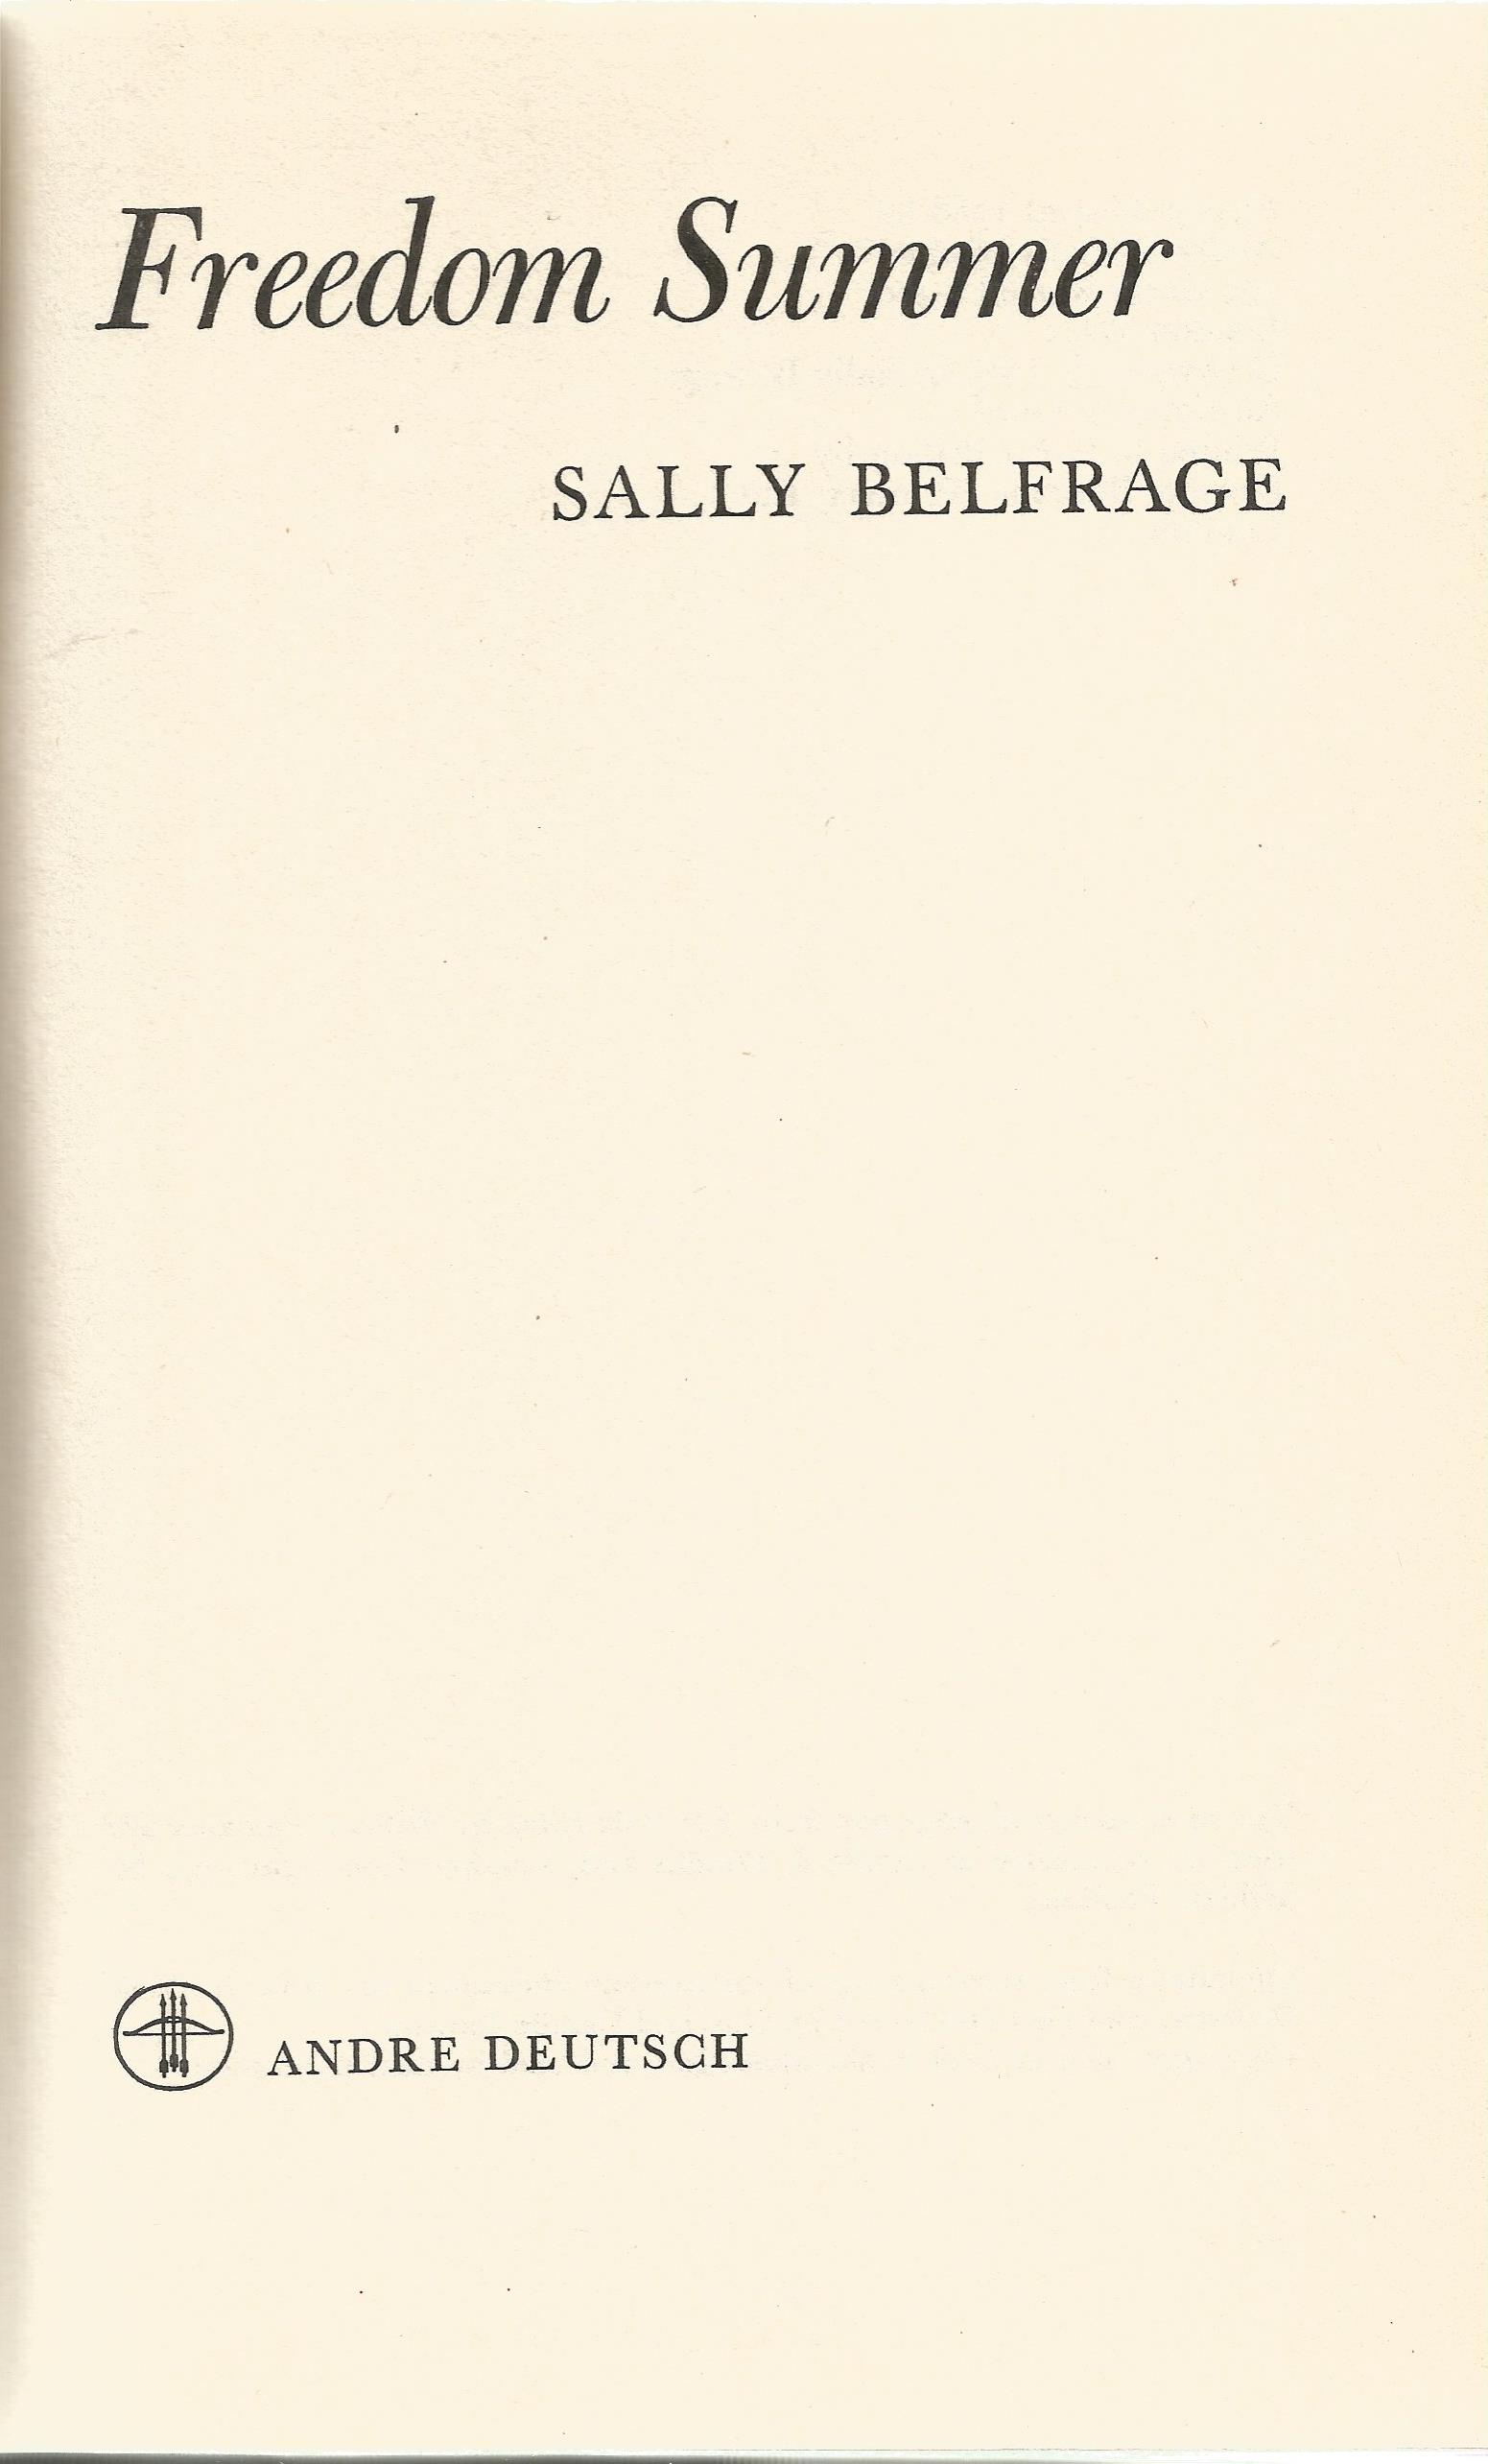 Freedom Summer by Sally Belfrage Hardback Book 1966 First Edition published by Andre Deutsch Ltd - Image 2 of 3